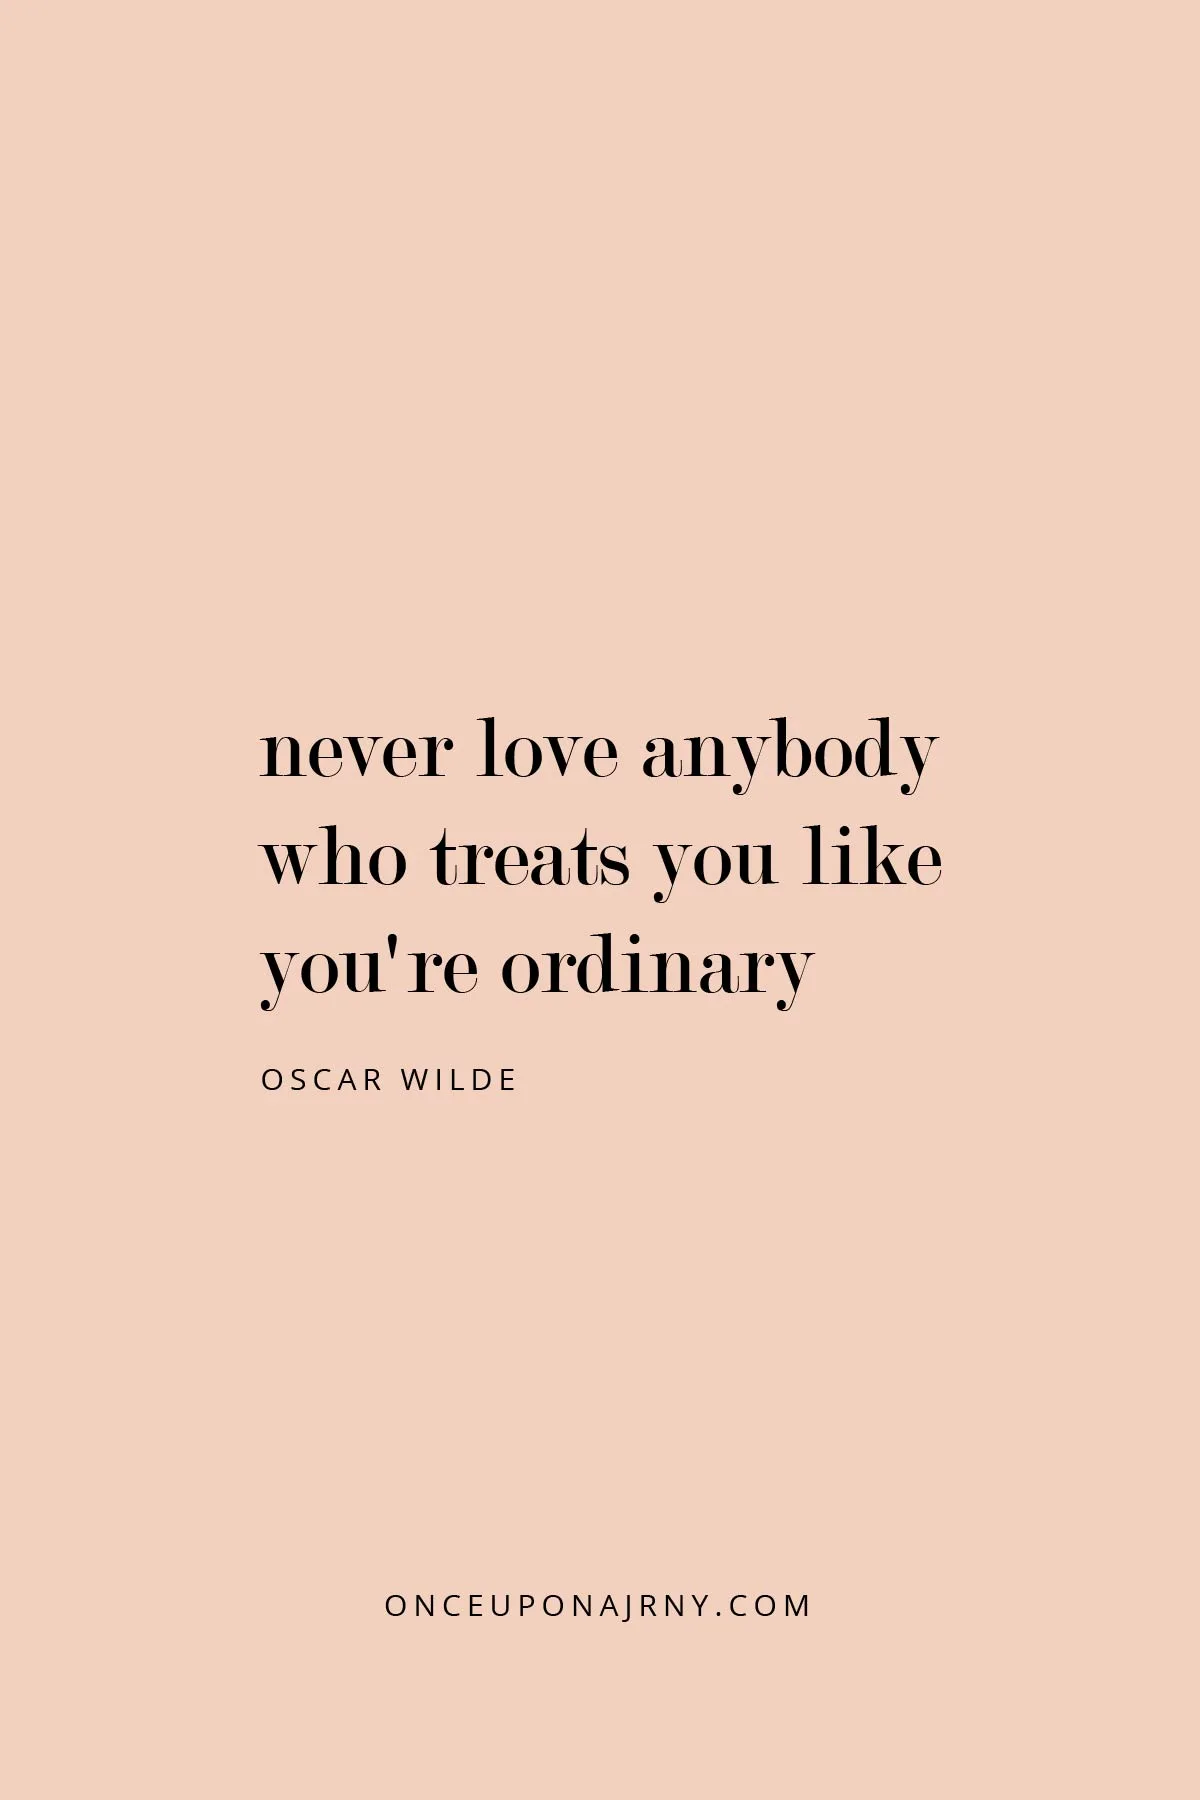 Never love anybody who treats you like you're ordinary. - Oscar Wilde lgbtq quotes